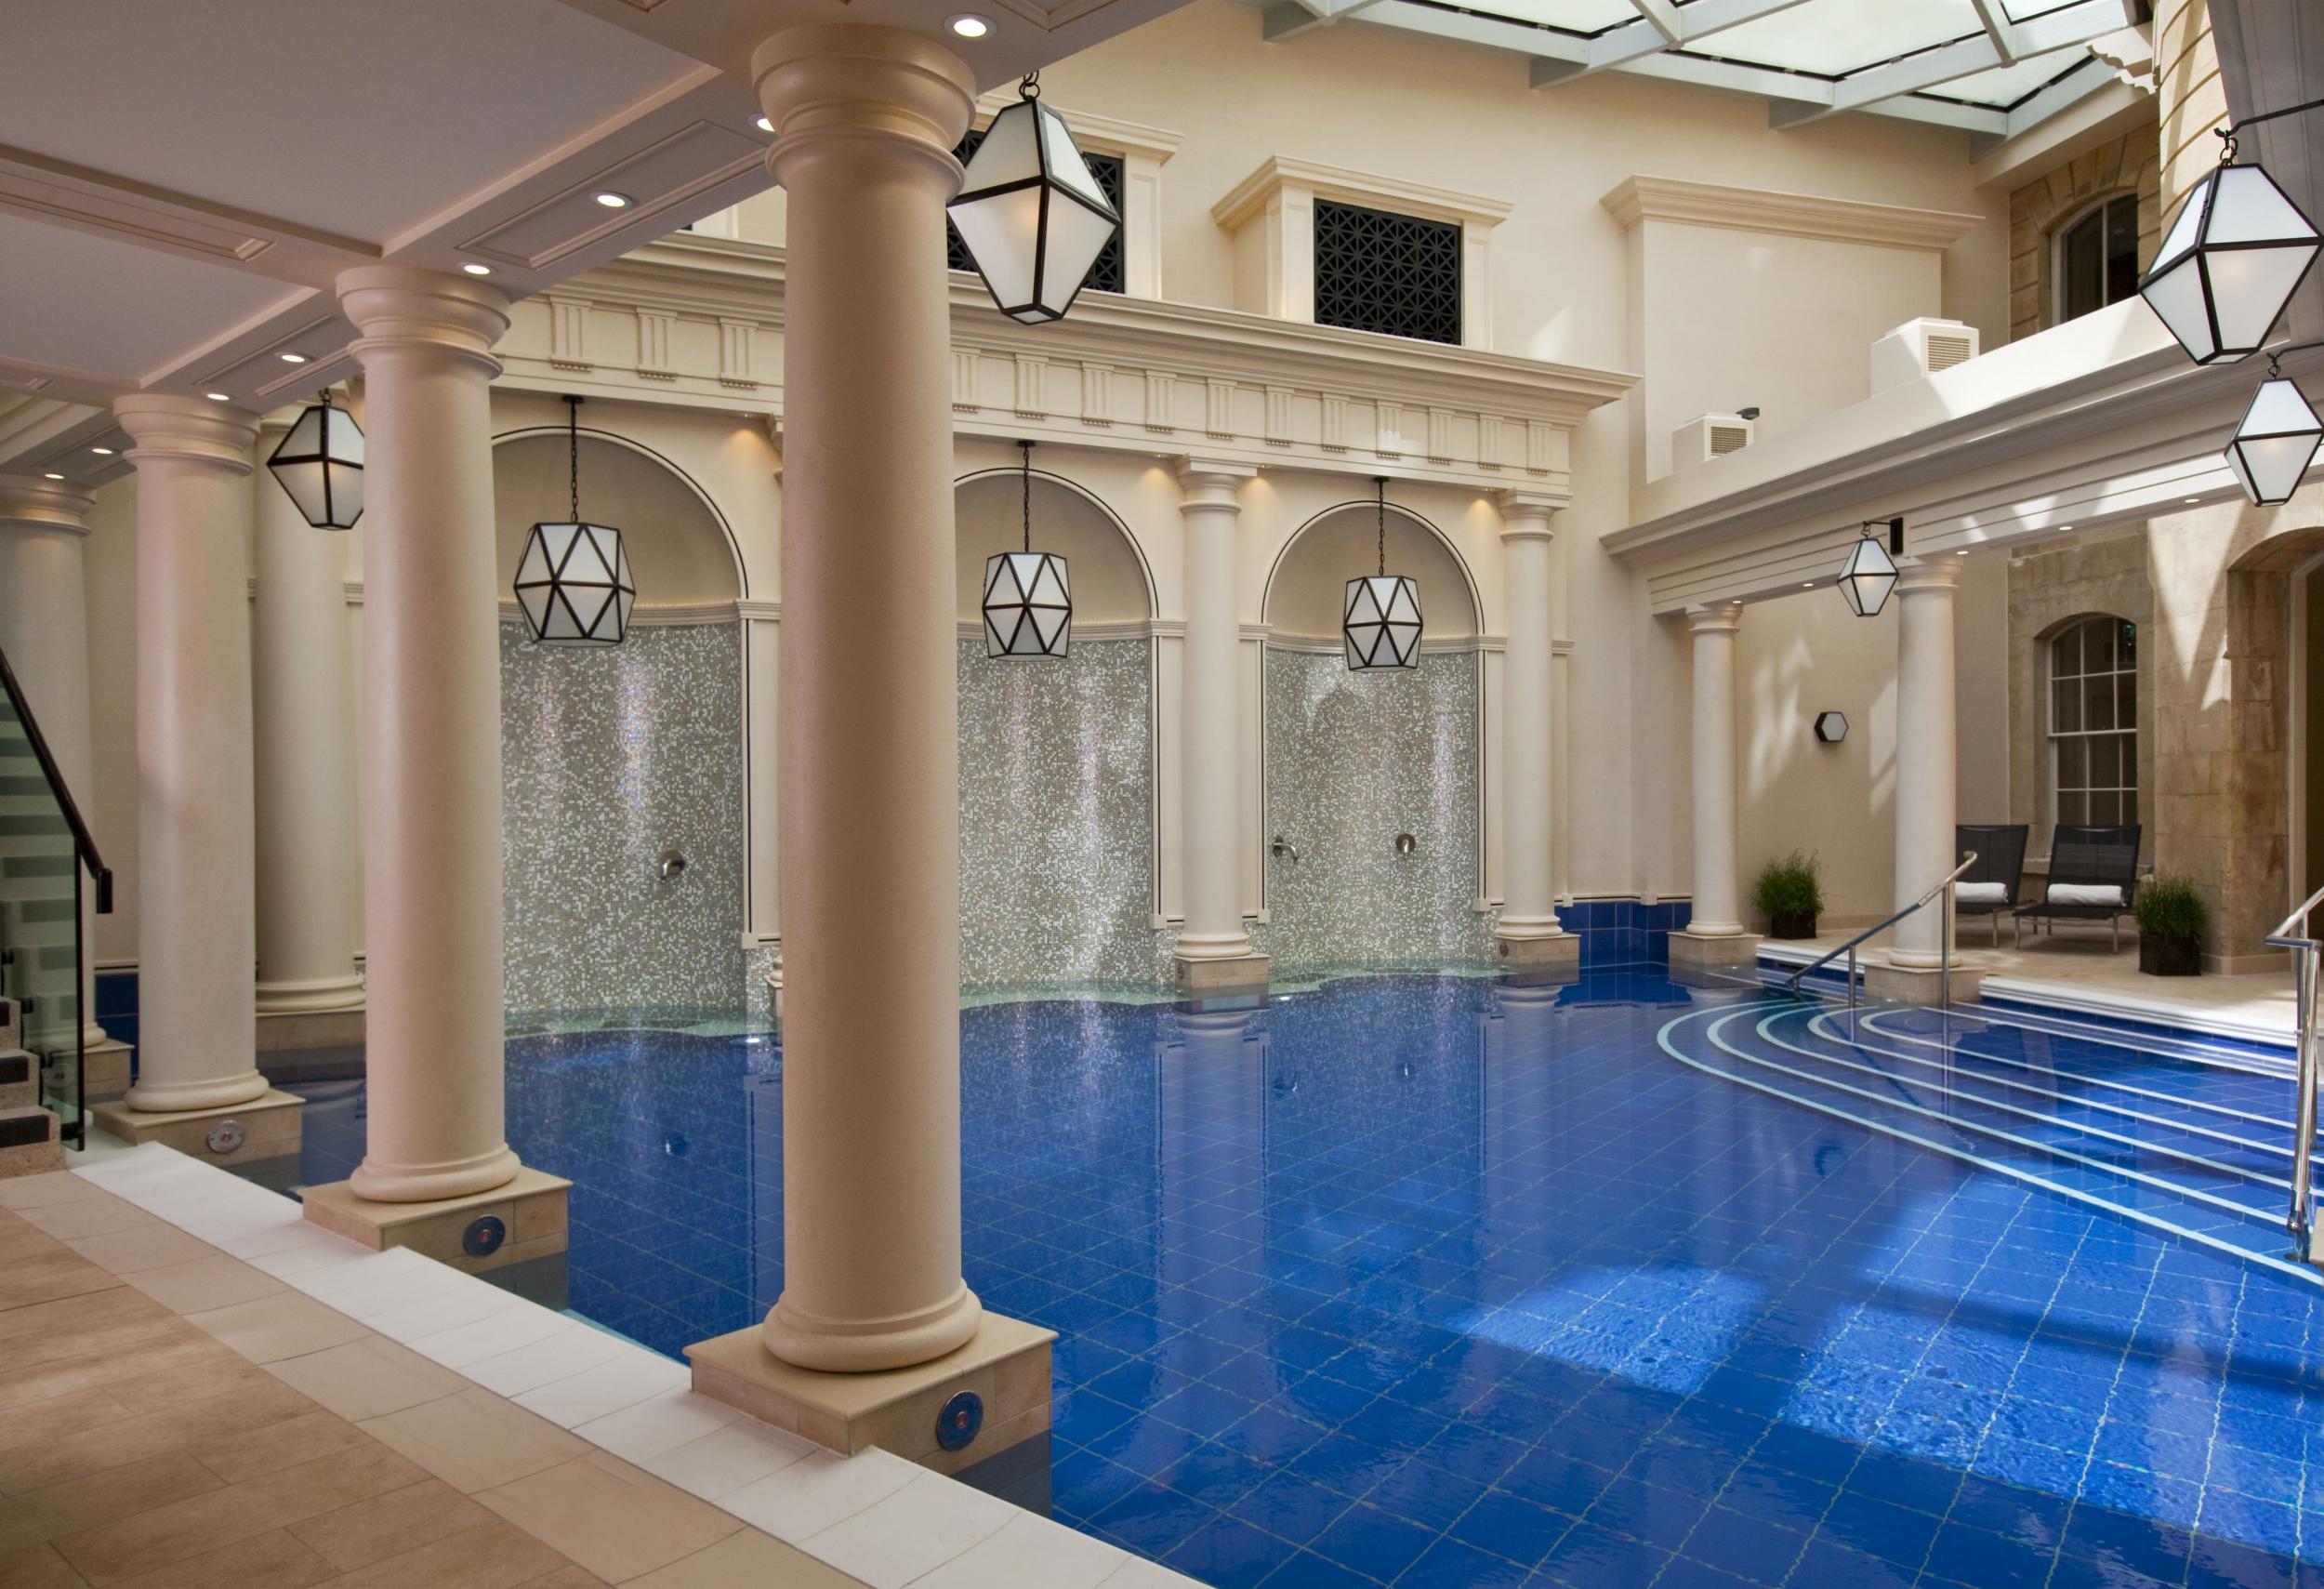 The Gainsborough boasts the UK’s only natural thermal pools inside a hotel